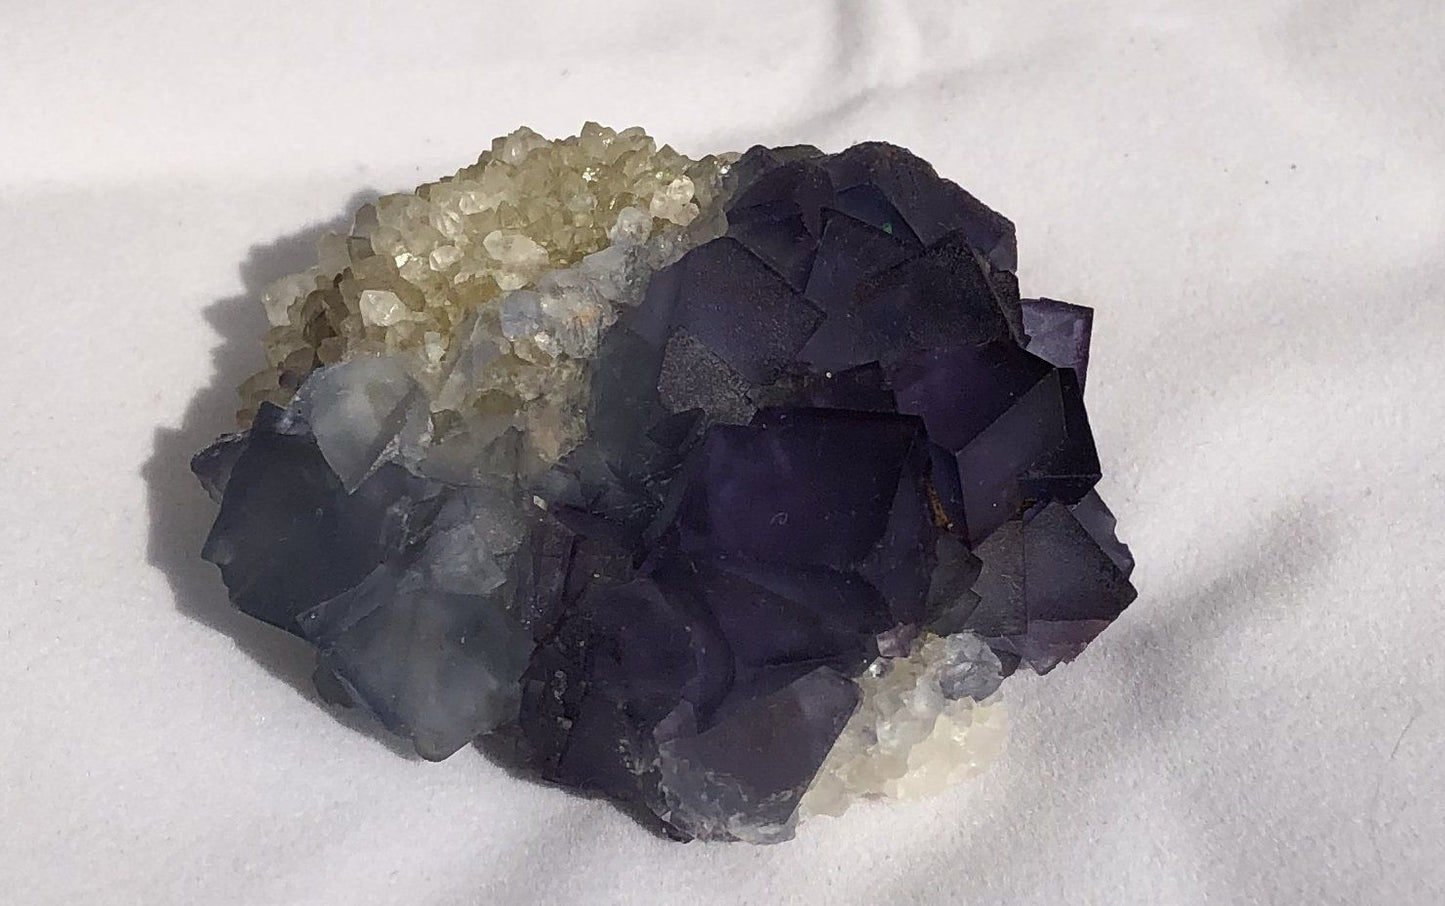 Blue Fluorite 1 - Bingham, New Mexico | Of Coins & Crystals